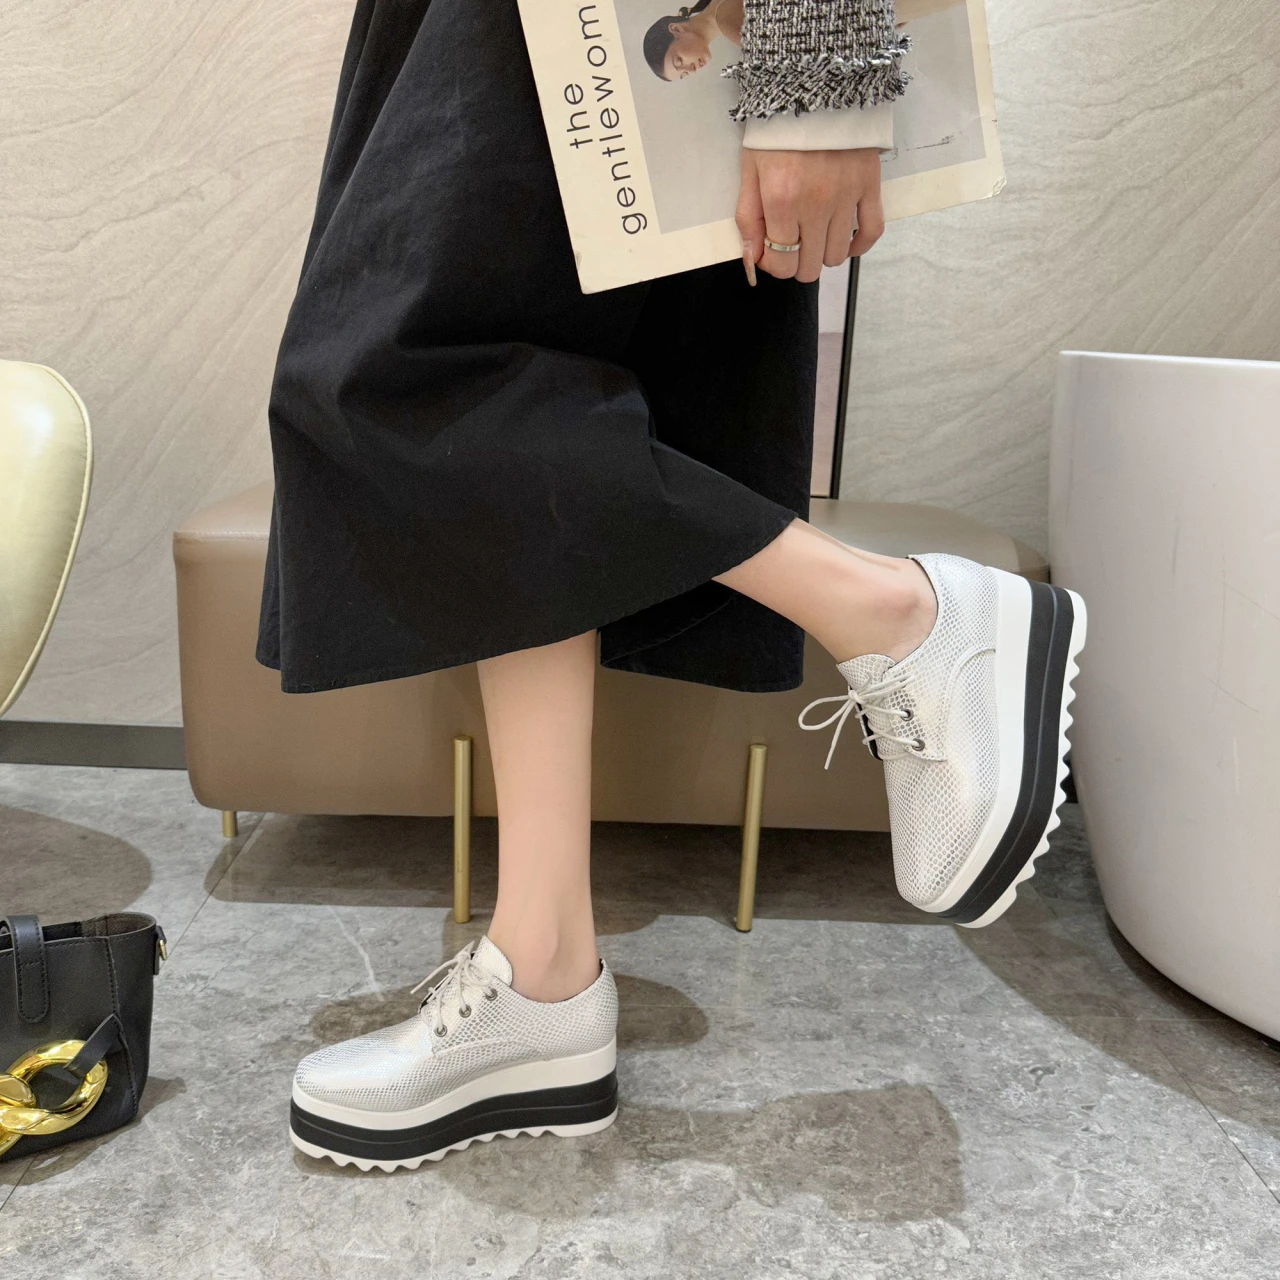 2023 Spring New Women Flat Platform Shoes Slip on Moccains Ladies Casual Shoes Woman Thick Sole Brogue Creepers Sneakers